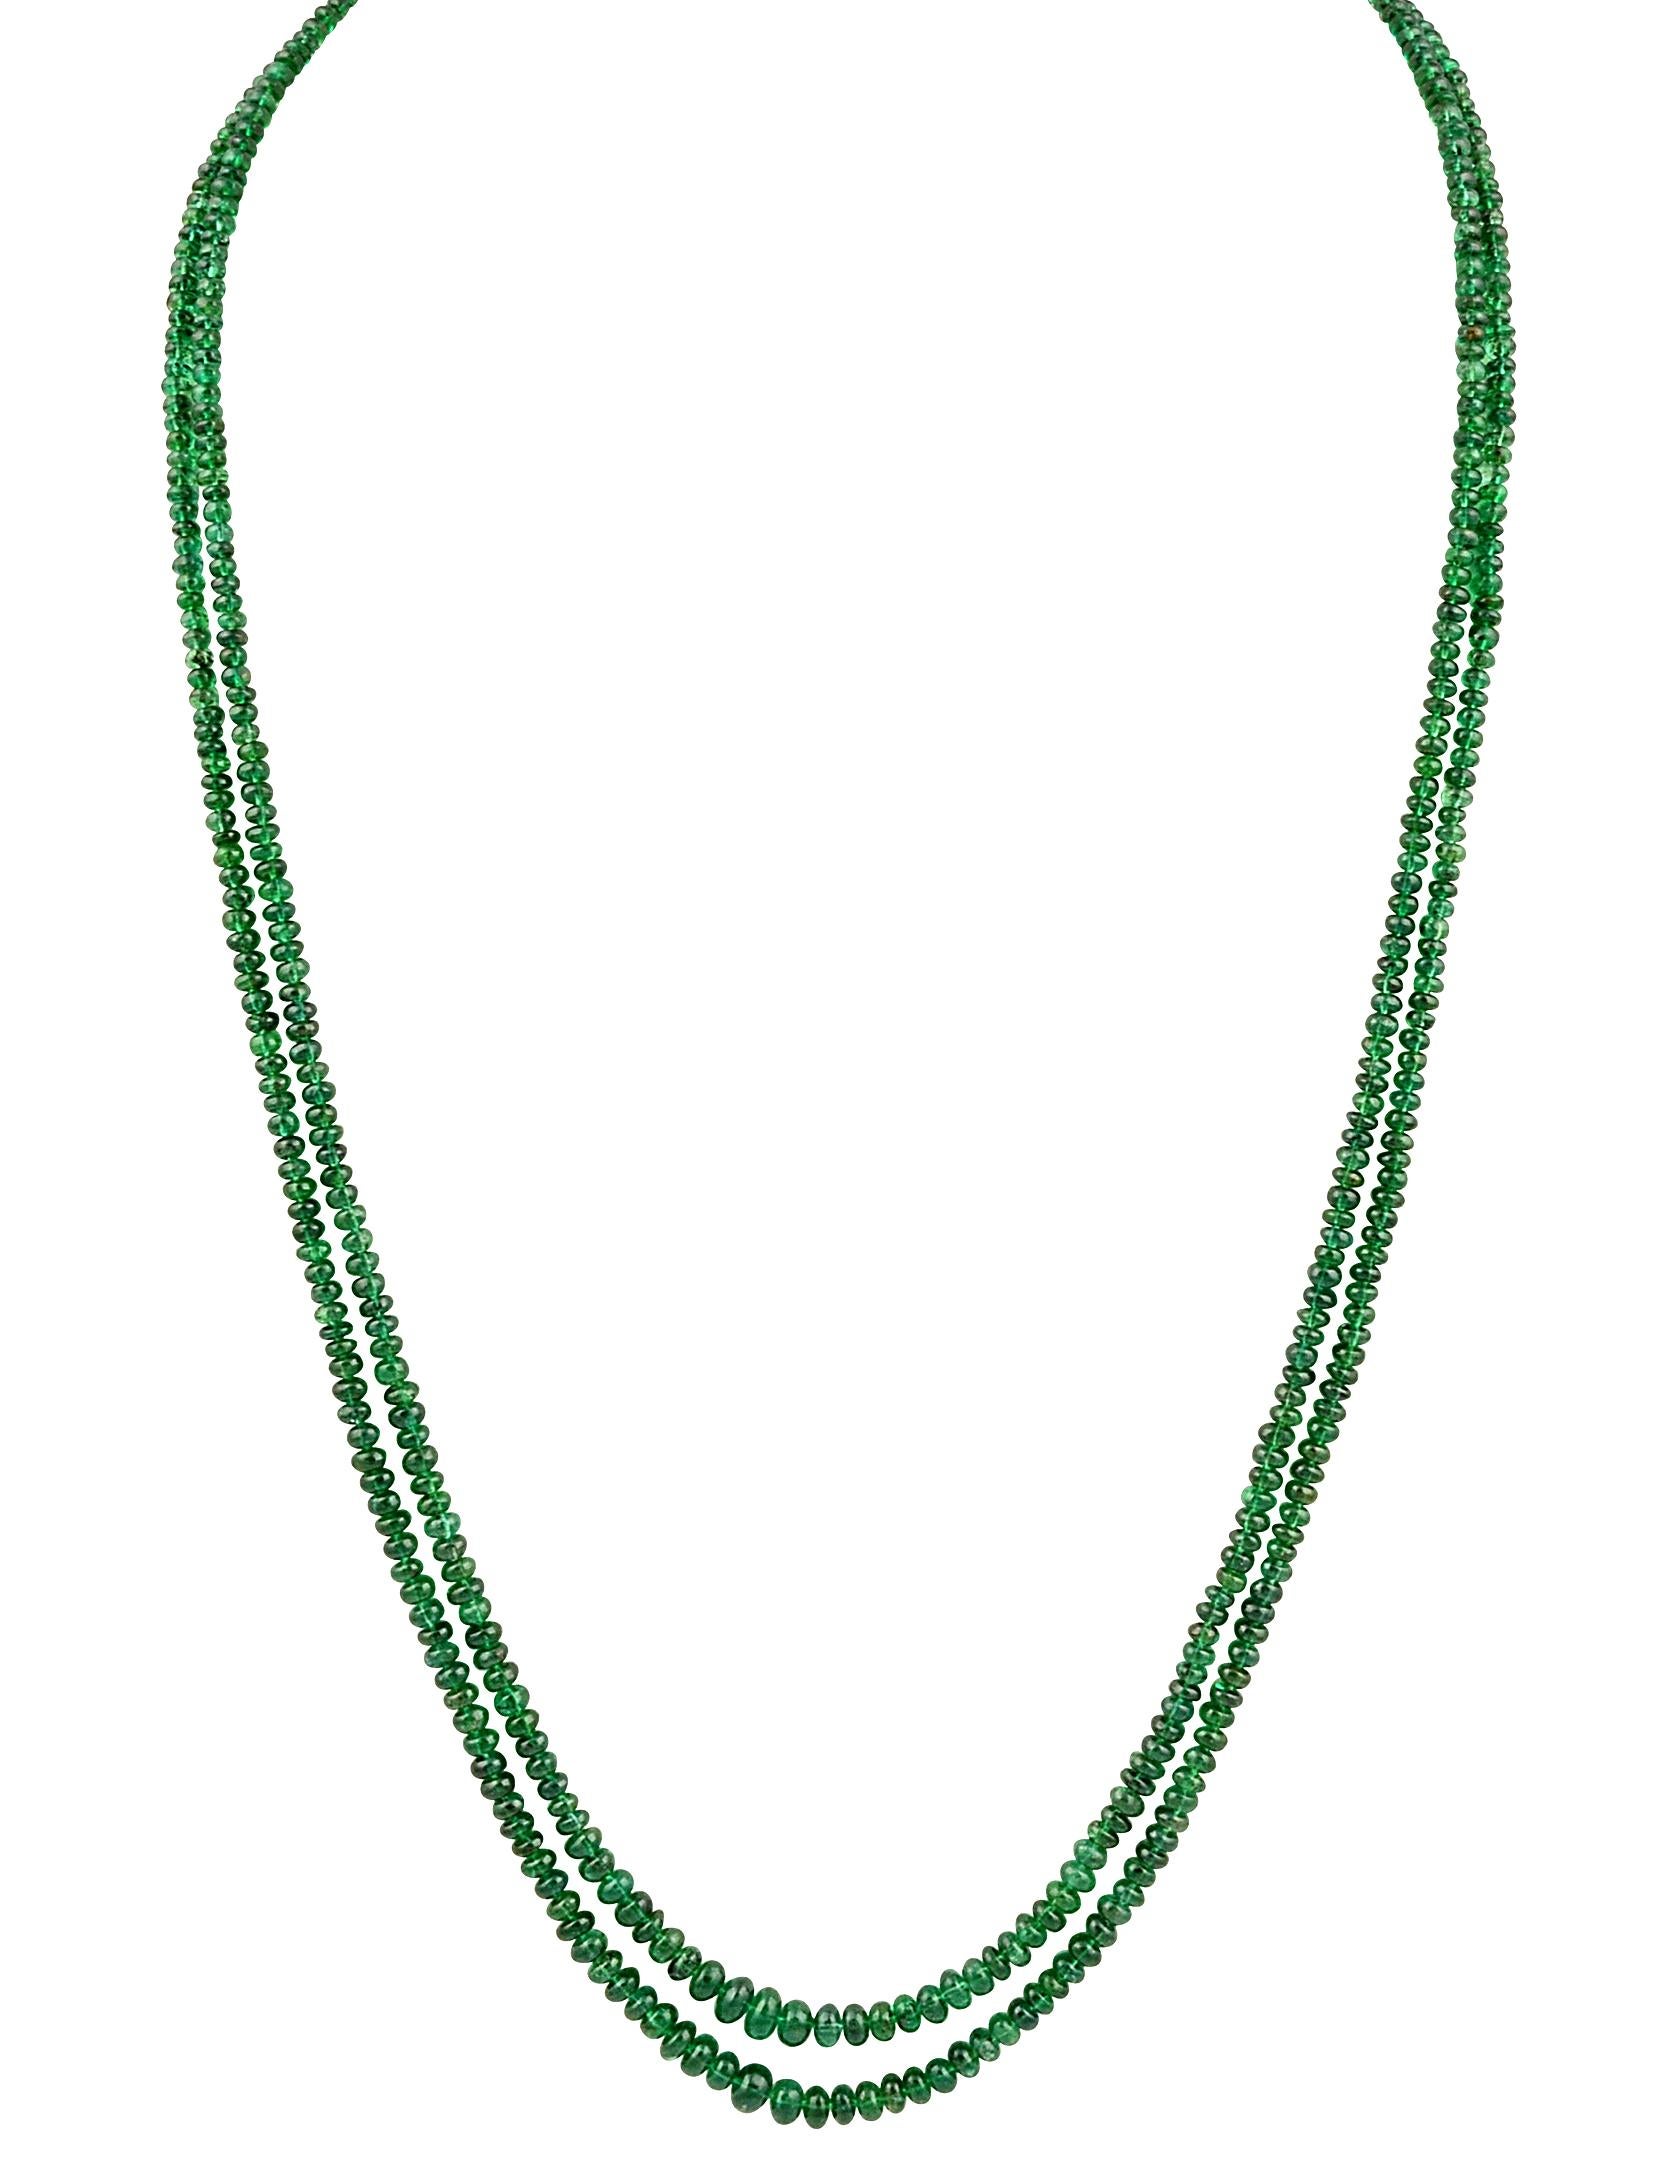 Approximately 125 Carat  very fine Emerald Beads 2 Line Necklace With 14 Karat Yellow Gold Clasp Adjustable with multiple links
This spectacular Necklace   consisting of approximately 125 Ct  of fine beads.
The shine sparkle and brilliance with deep